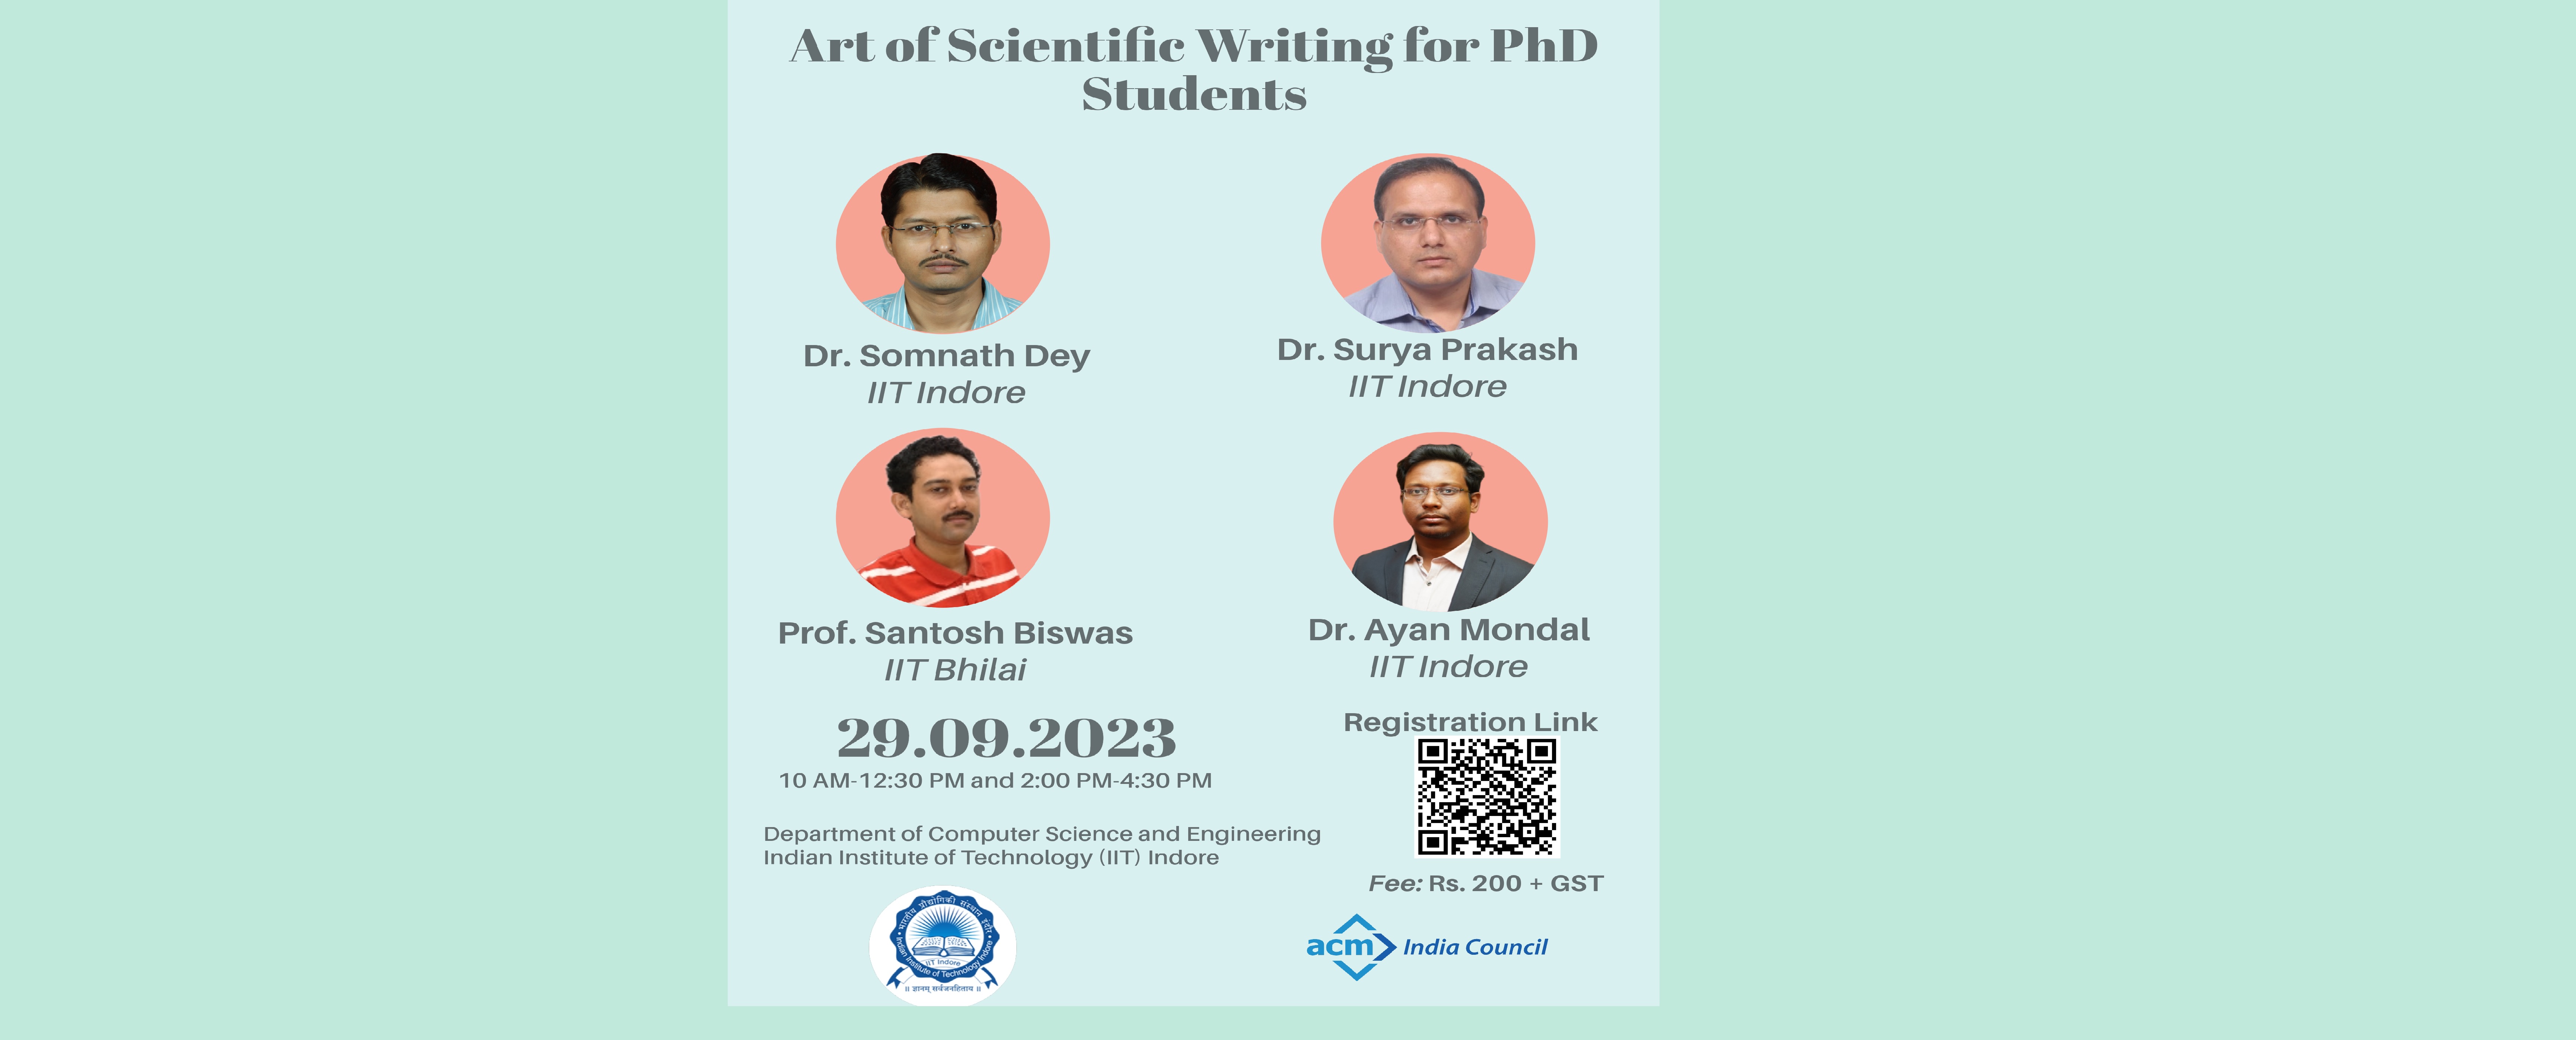 Art of Scientific Writing for PhD Students